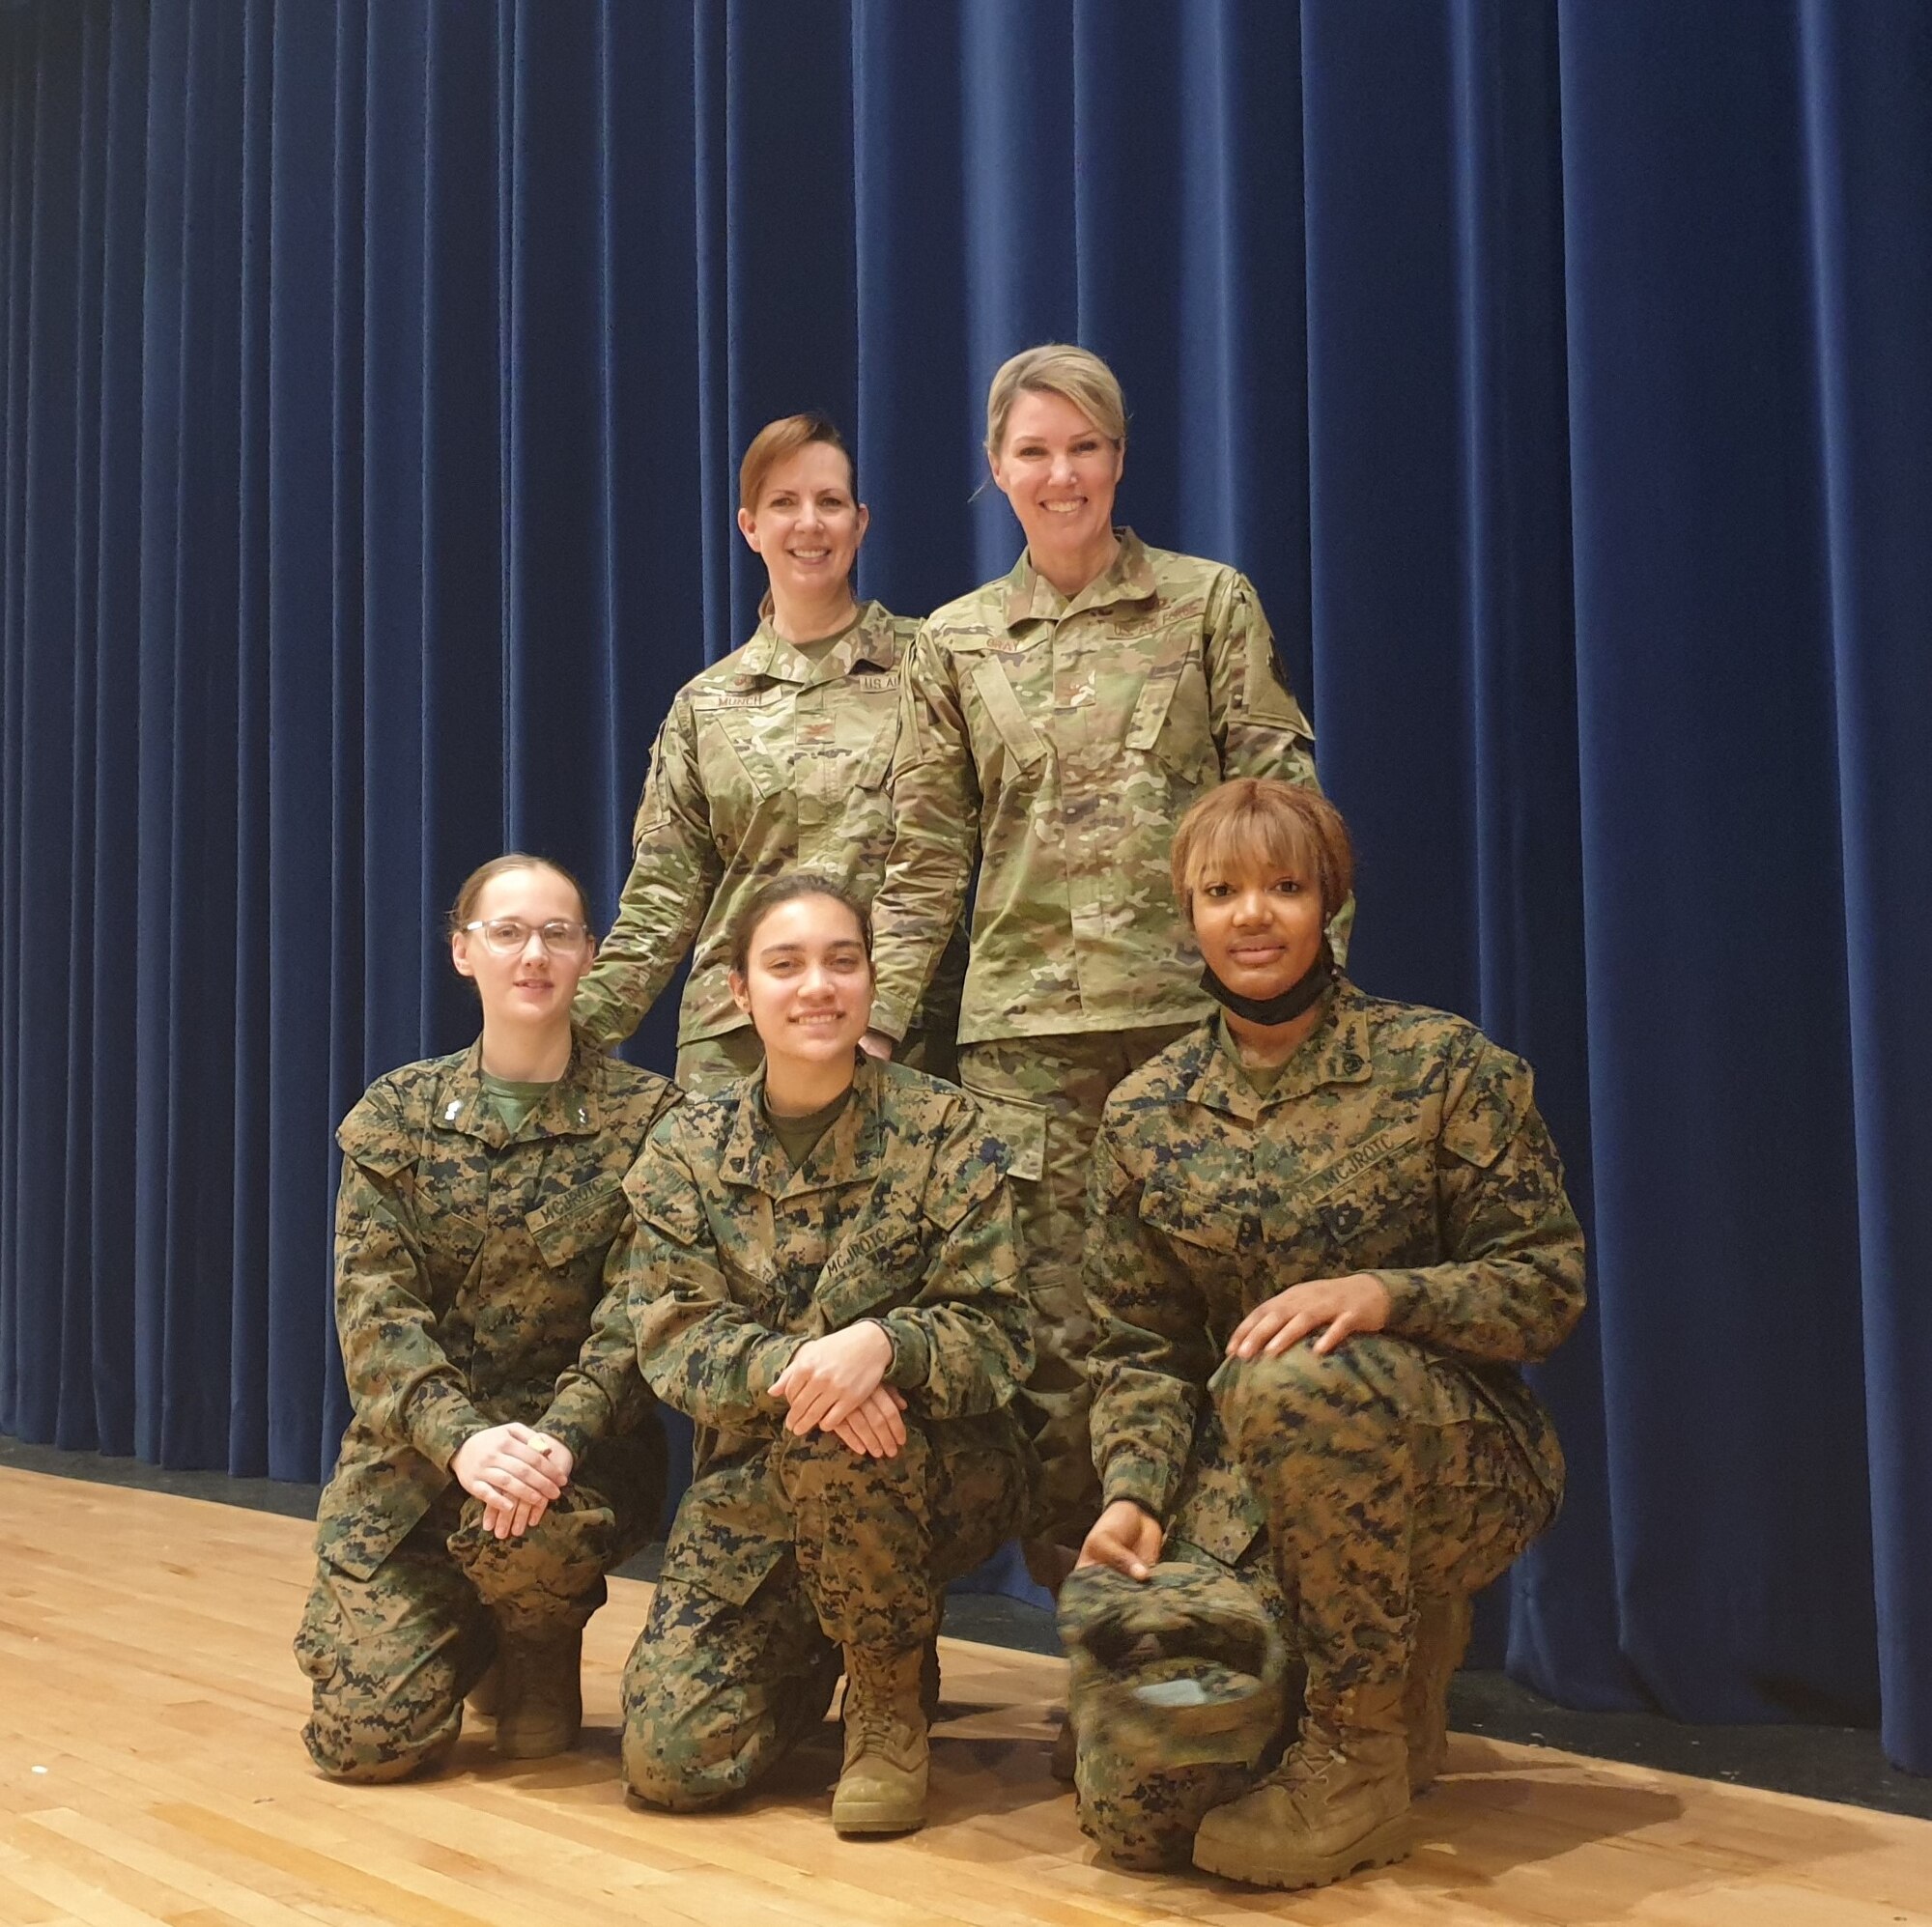 A group of women wearing military uniforms pose for a picture.